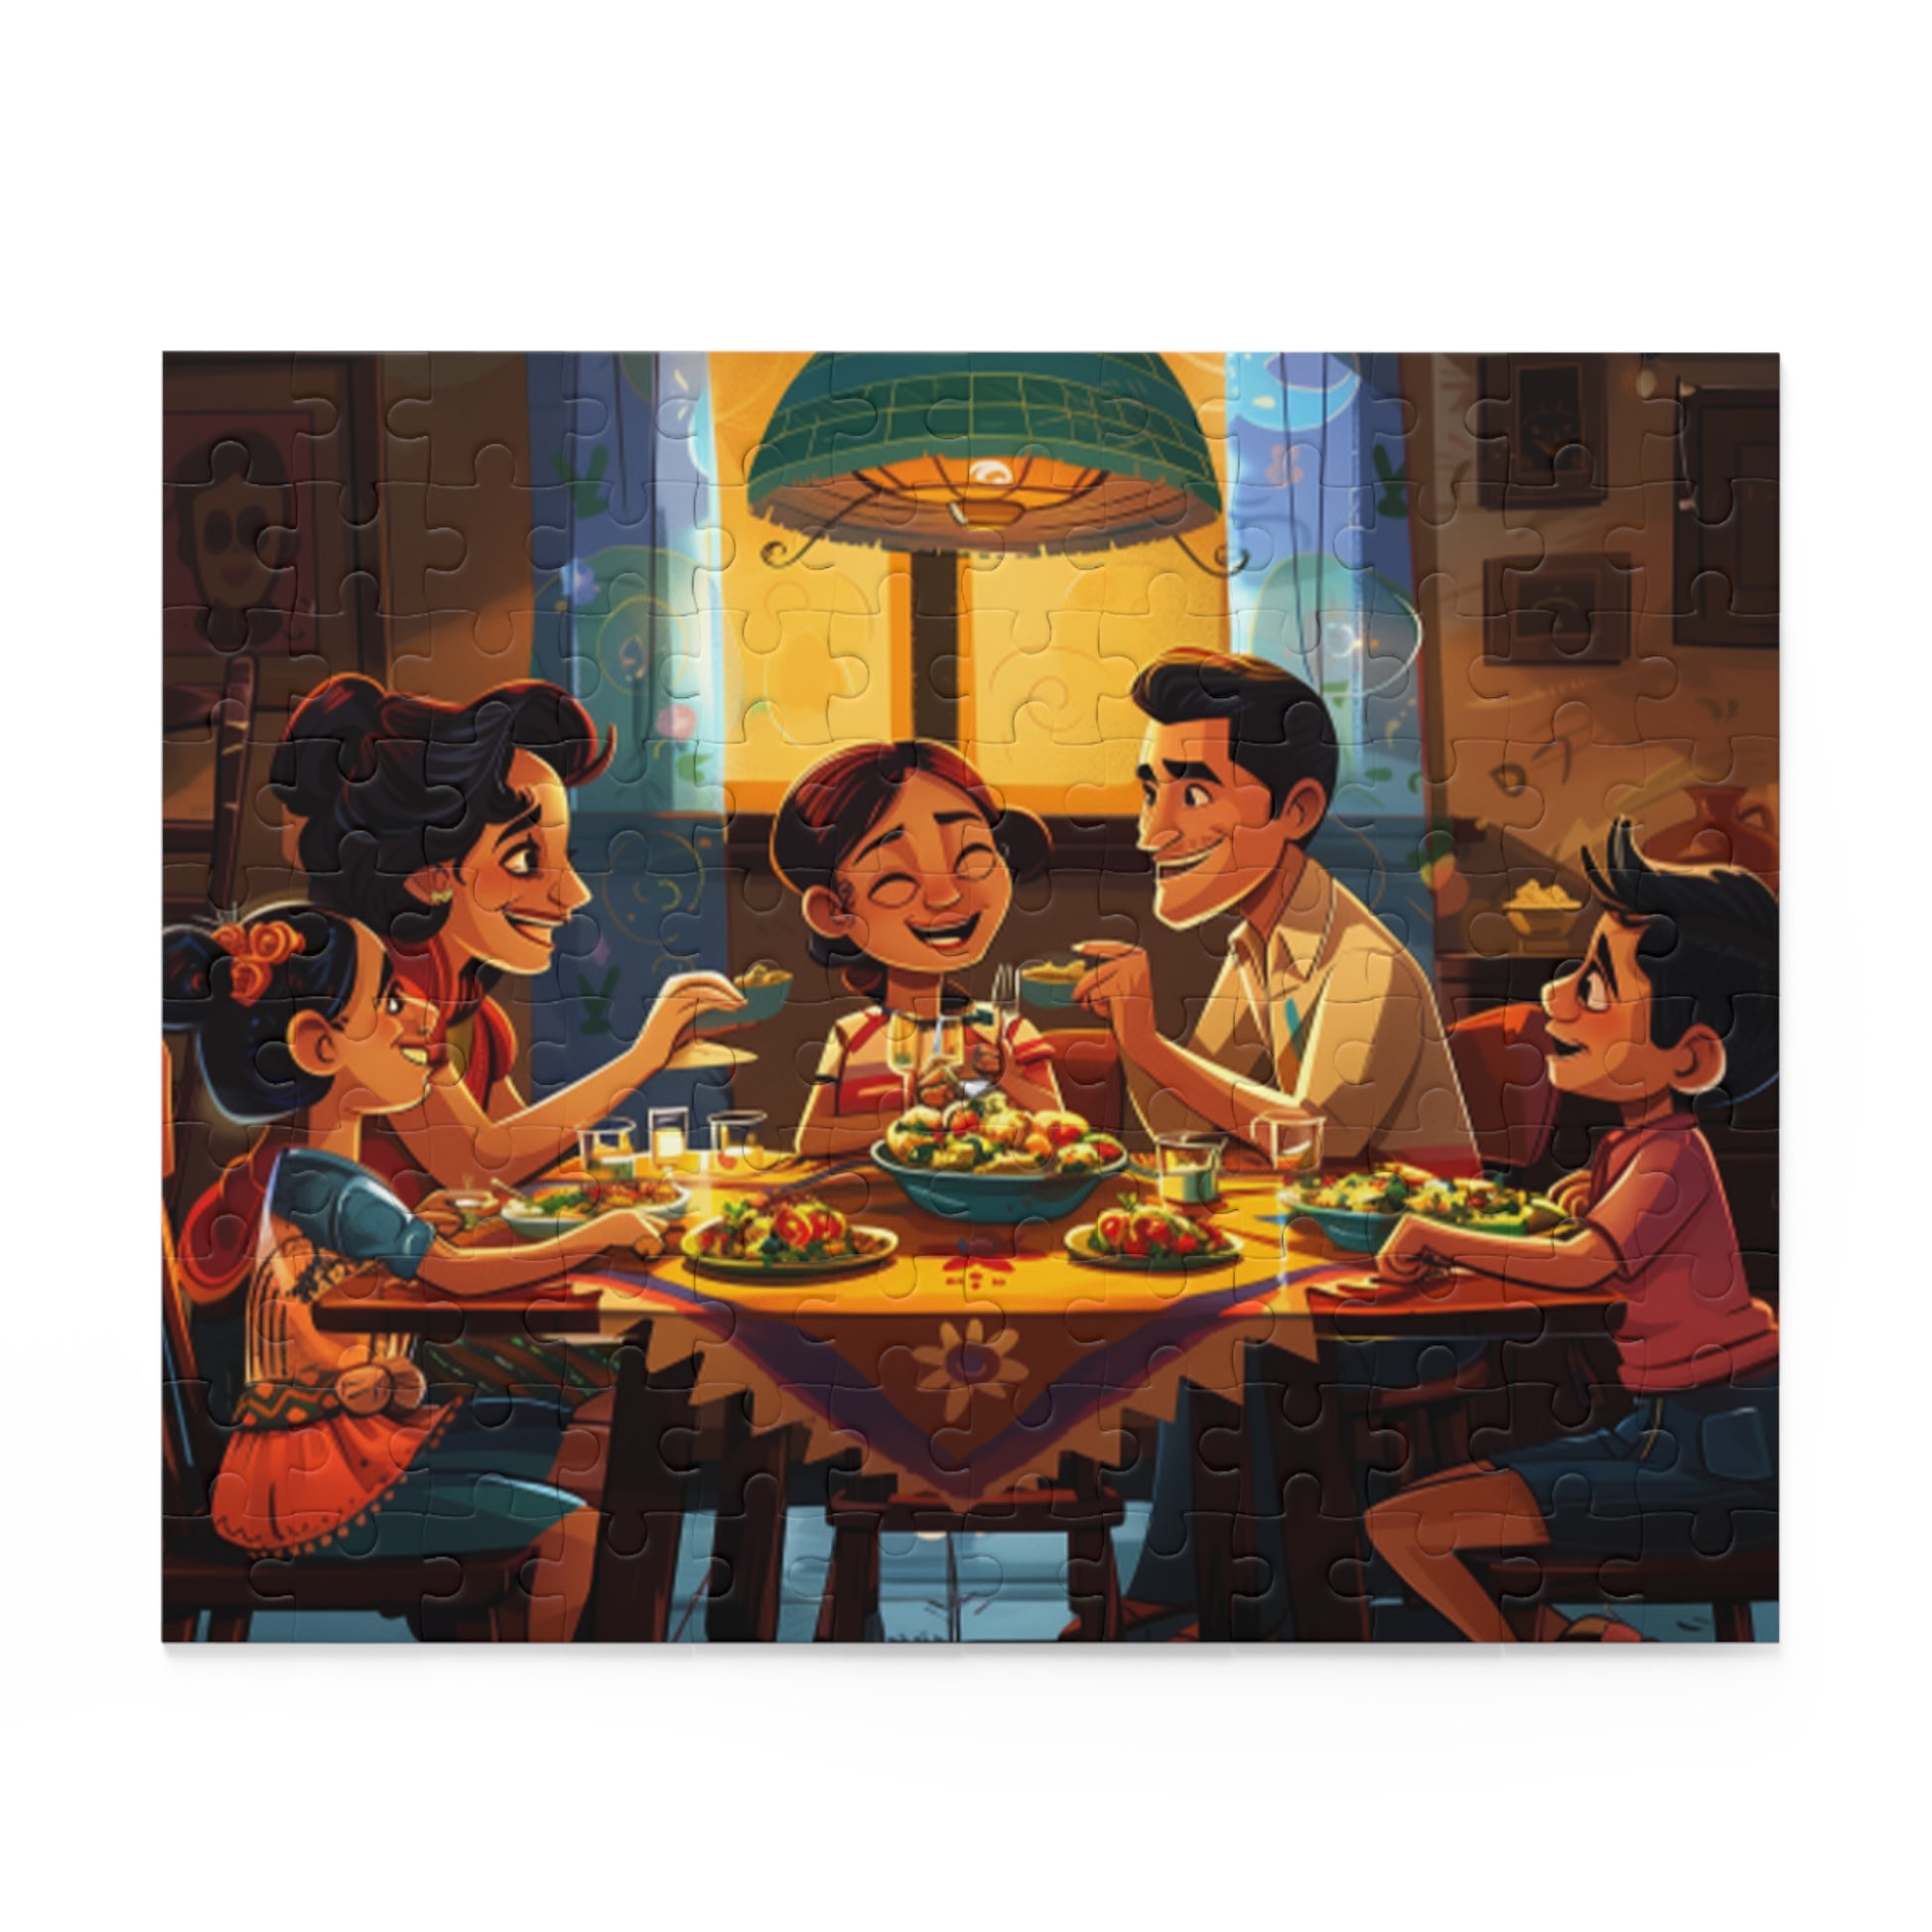 Mexican Art Happy Family Retro Jigsaw Puzzle Adult Birthday Business Jigsaw Puzzle Gift for Him Funny Humorous Indoor Outdoor Game Gift For Her Online-2